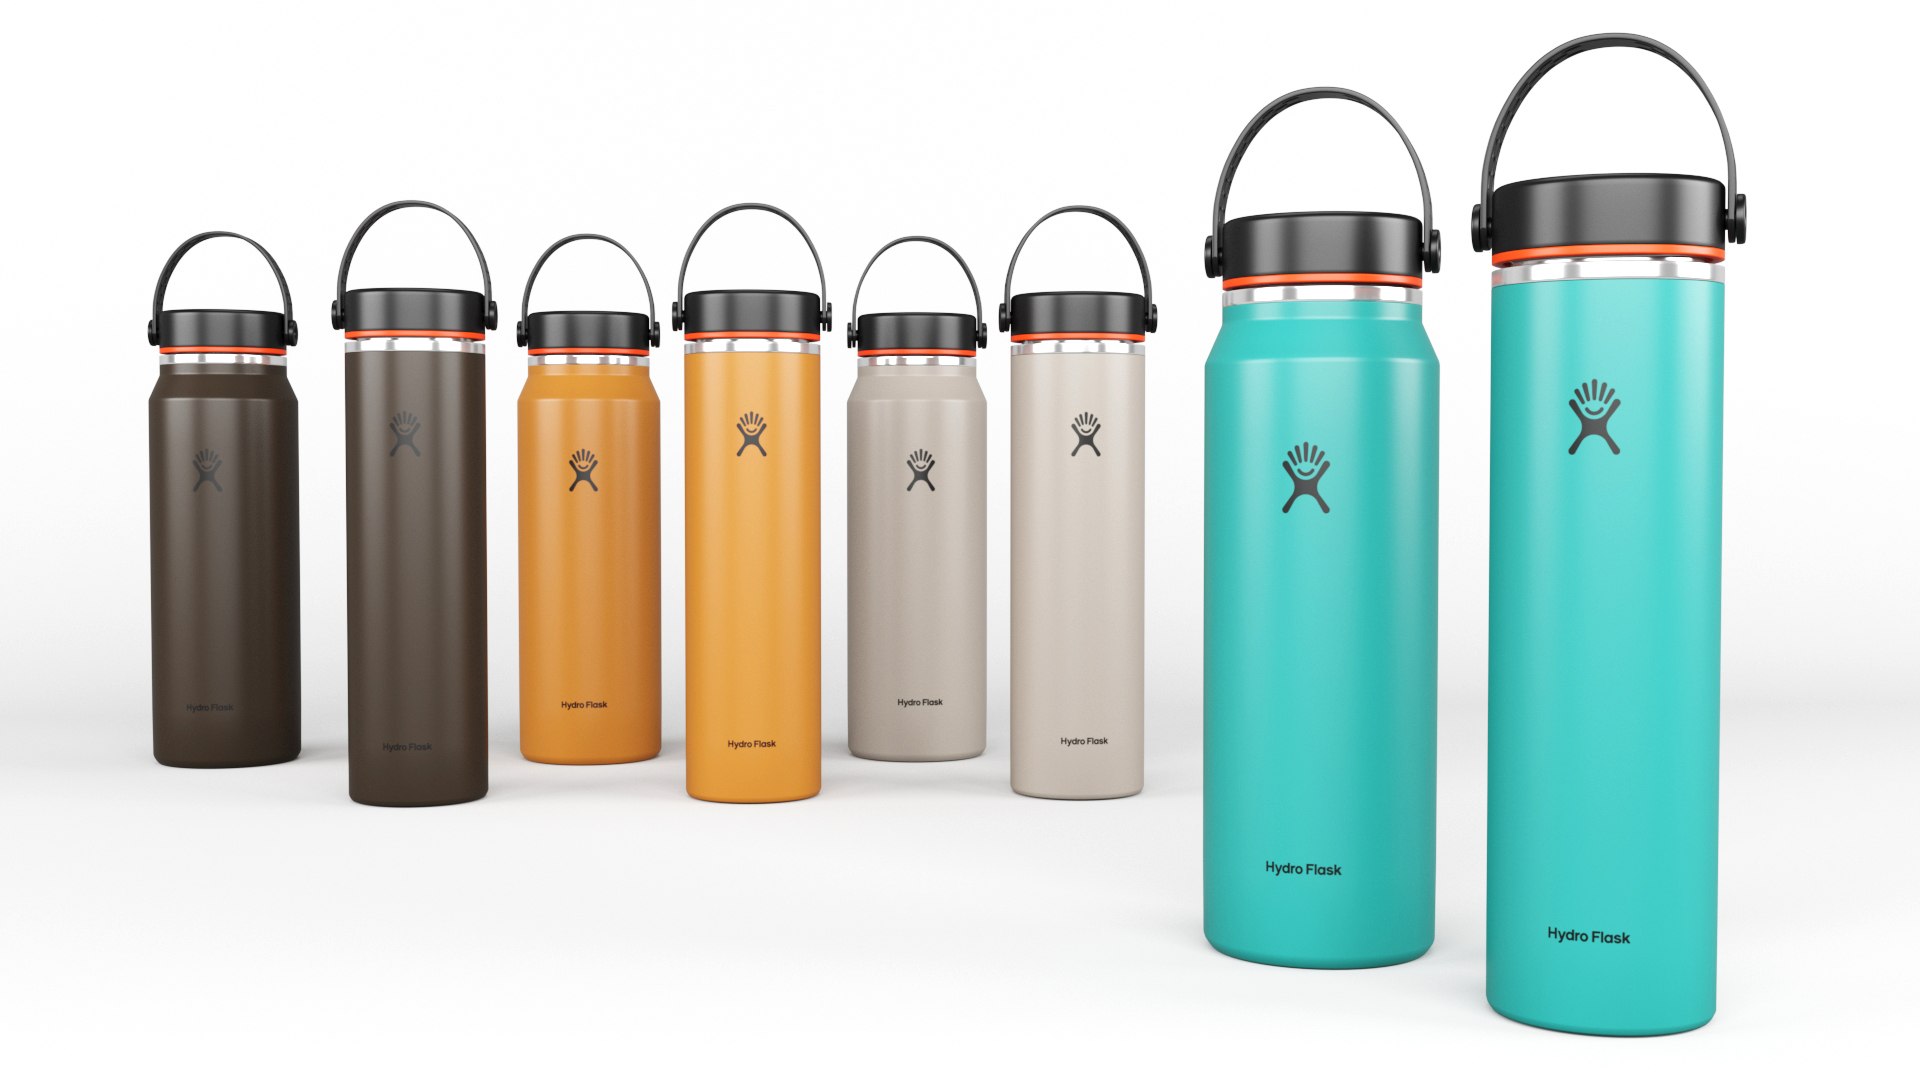 Hydro Flask 24 oz Light Weight Wide Mouth Trail Series by kebunpisank